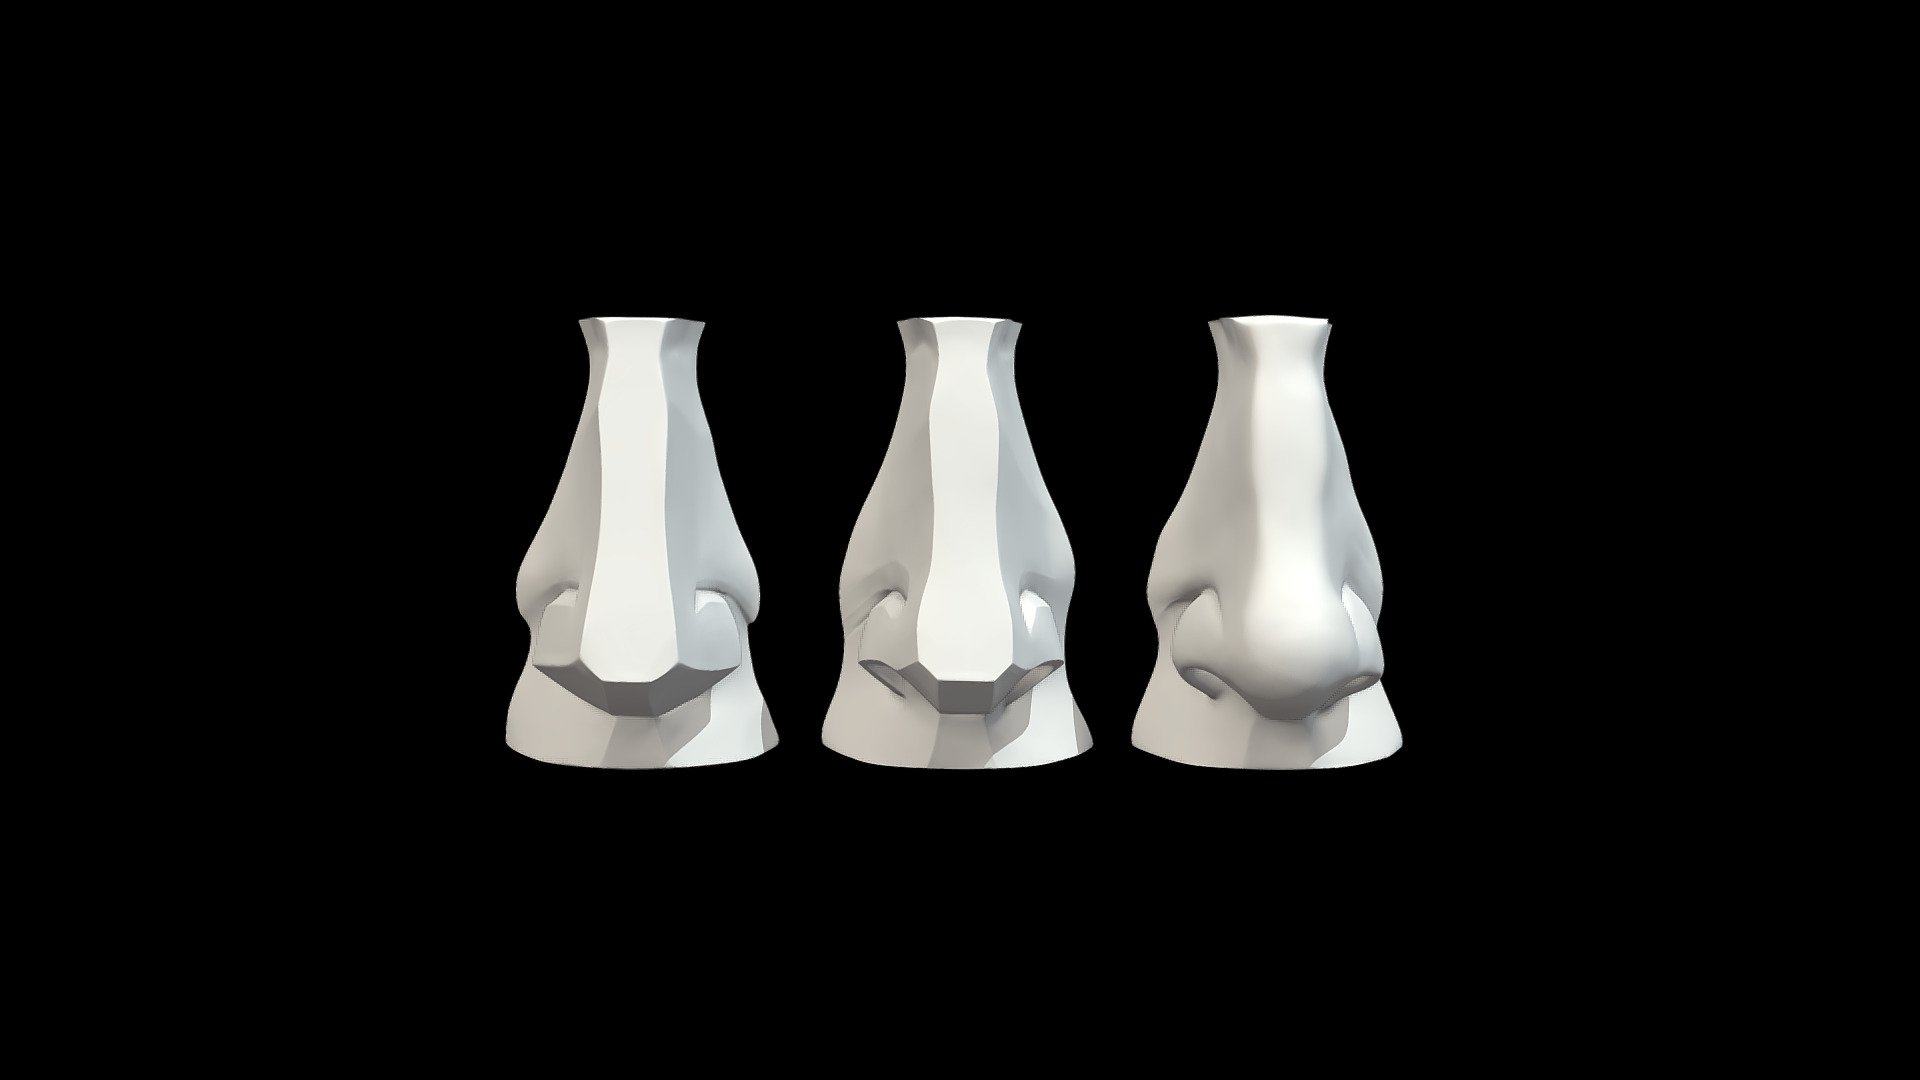 Proper for artists such as painter or sculptor to study and understanding the Nose 3d model